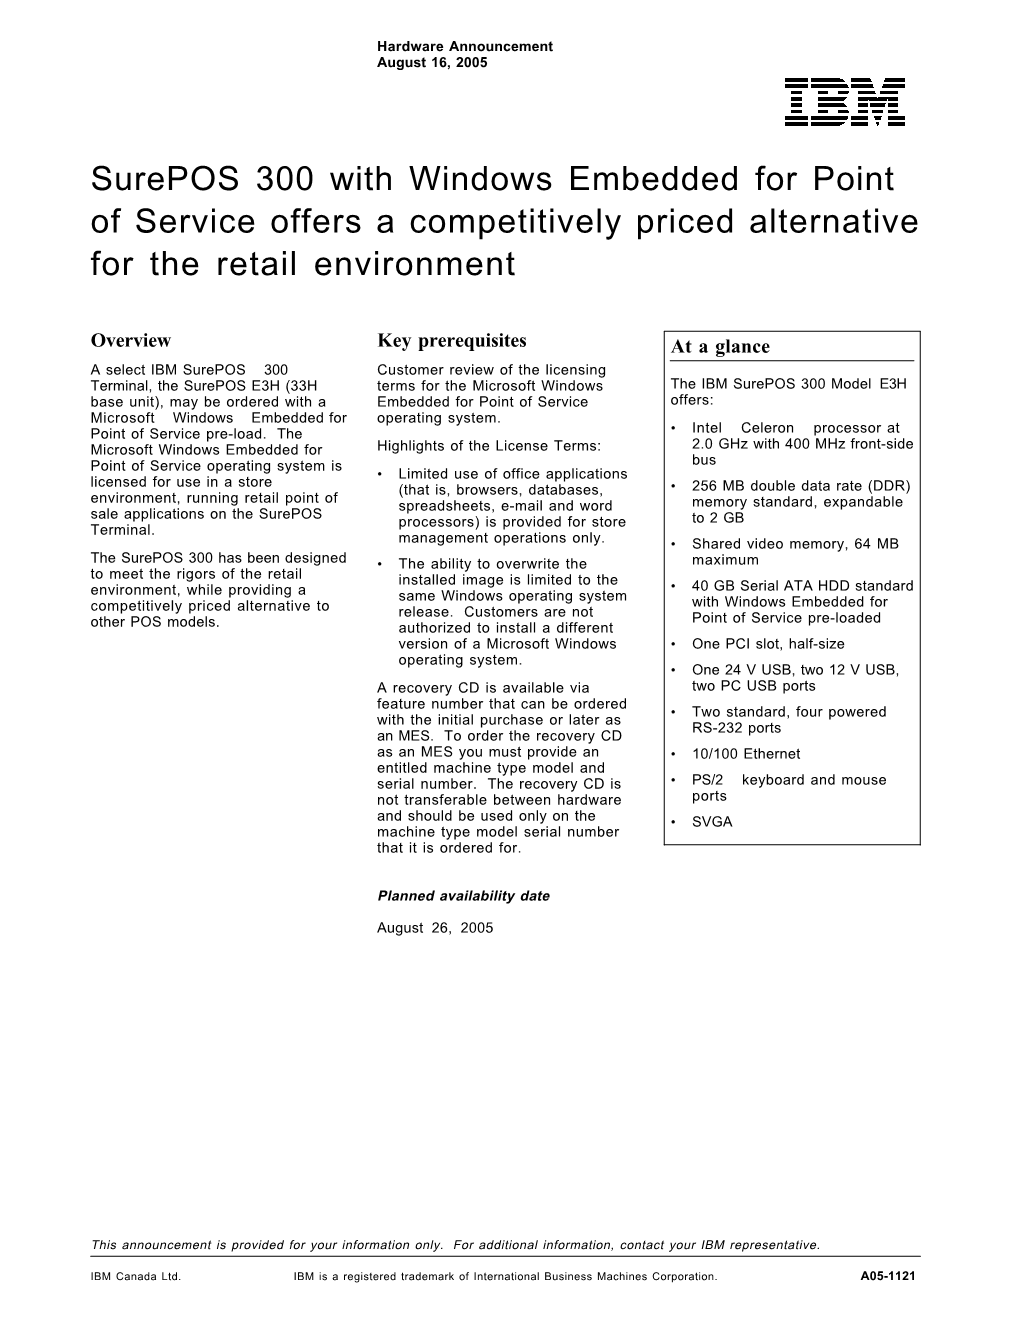 Surepos 300 with Windows Embedded for Point of Service Offers a Competitively Priced Alternative for the Retail Environment